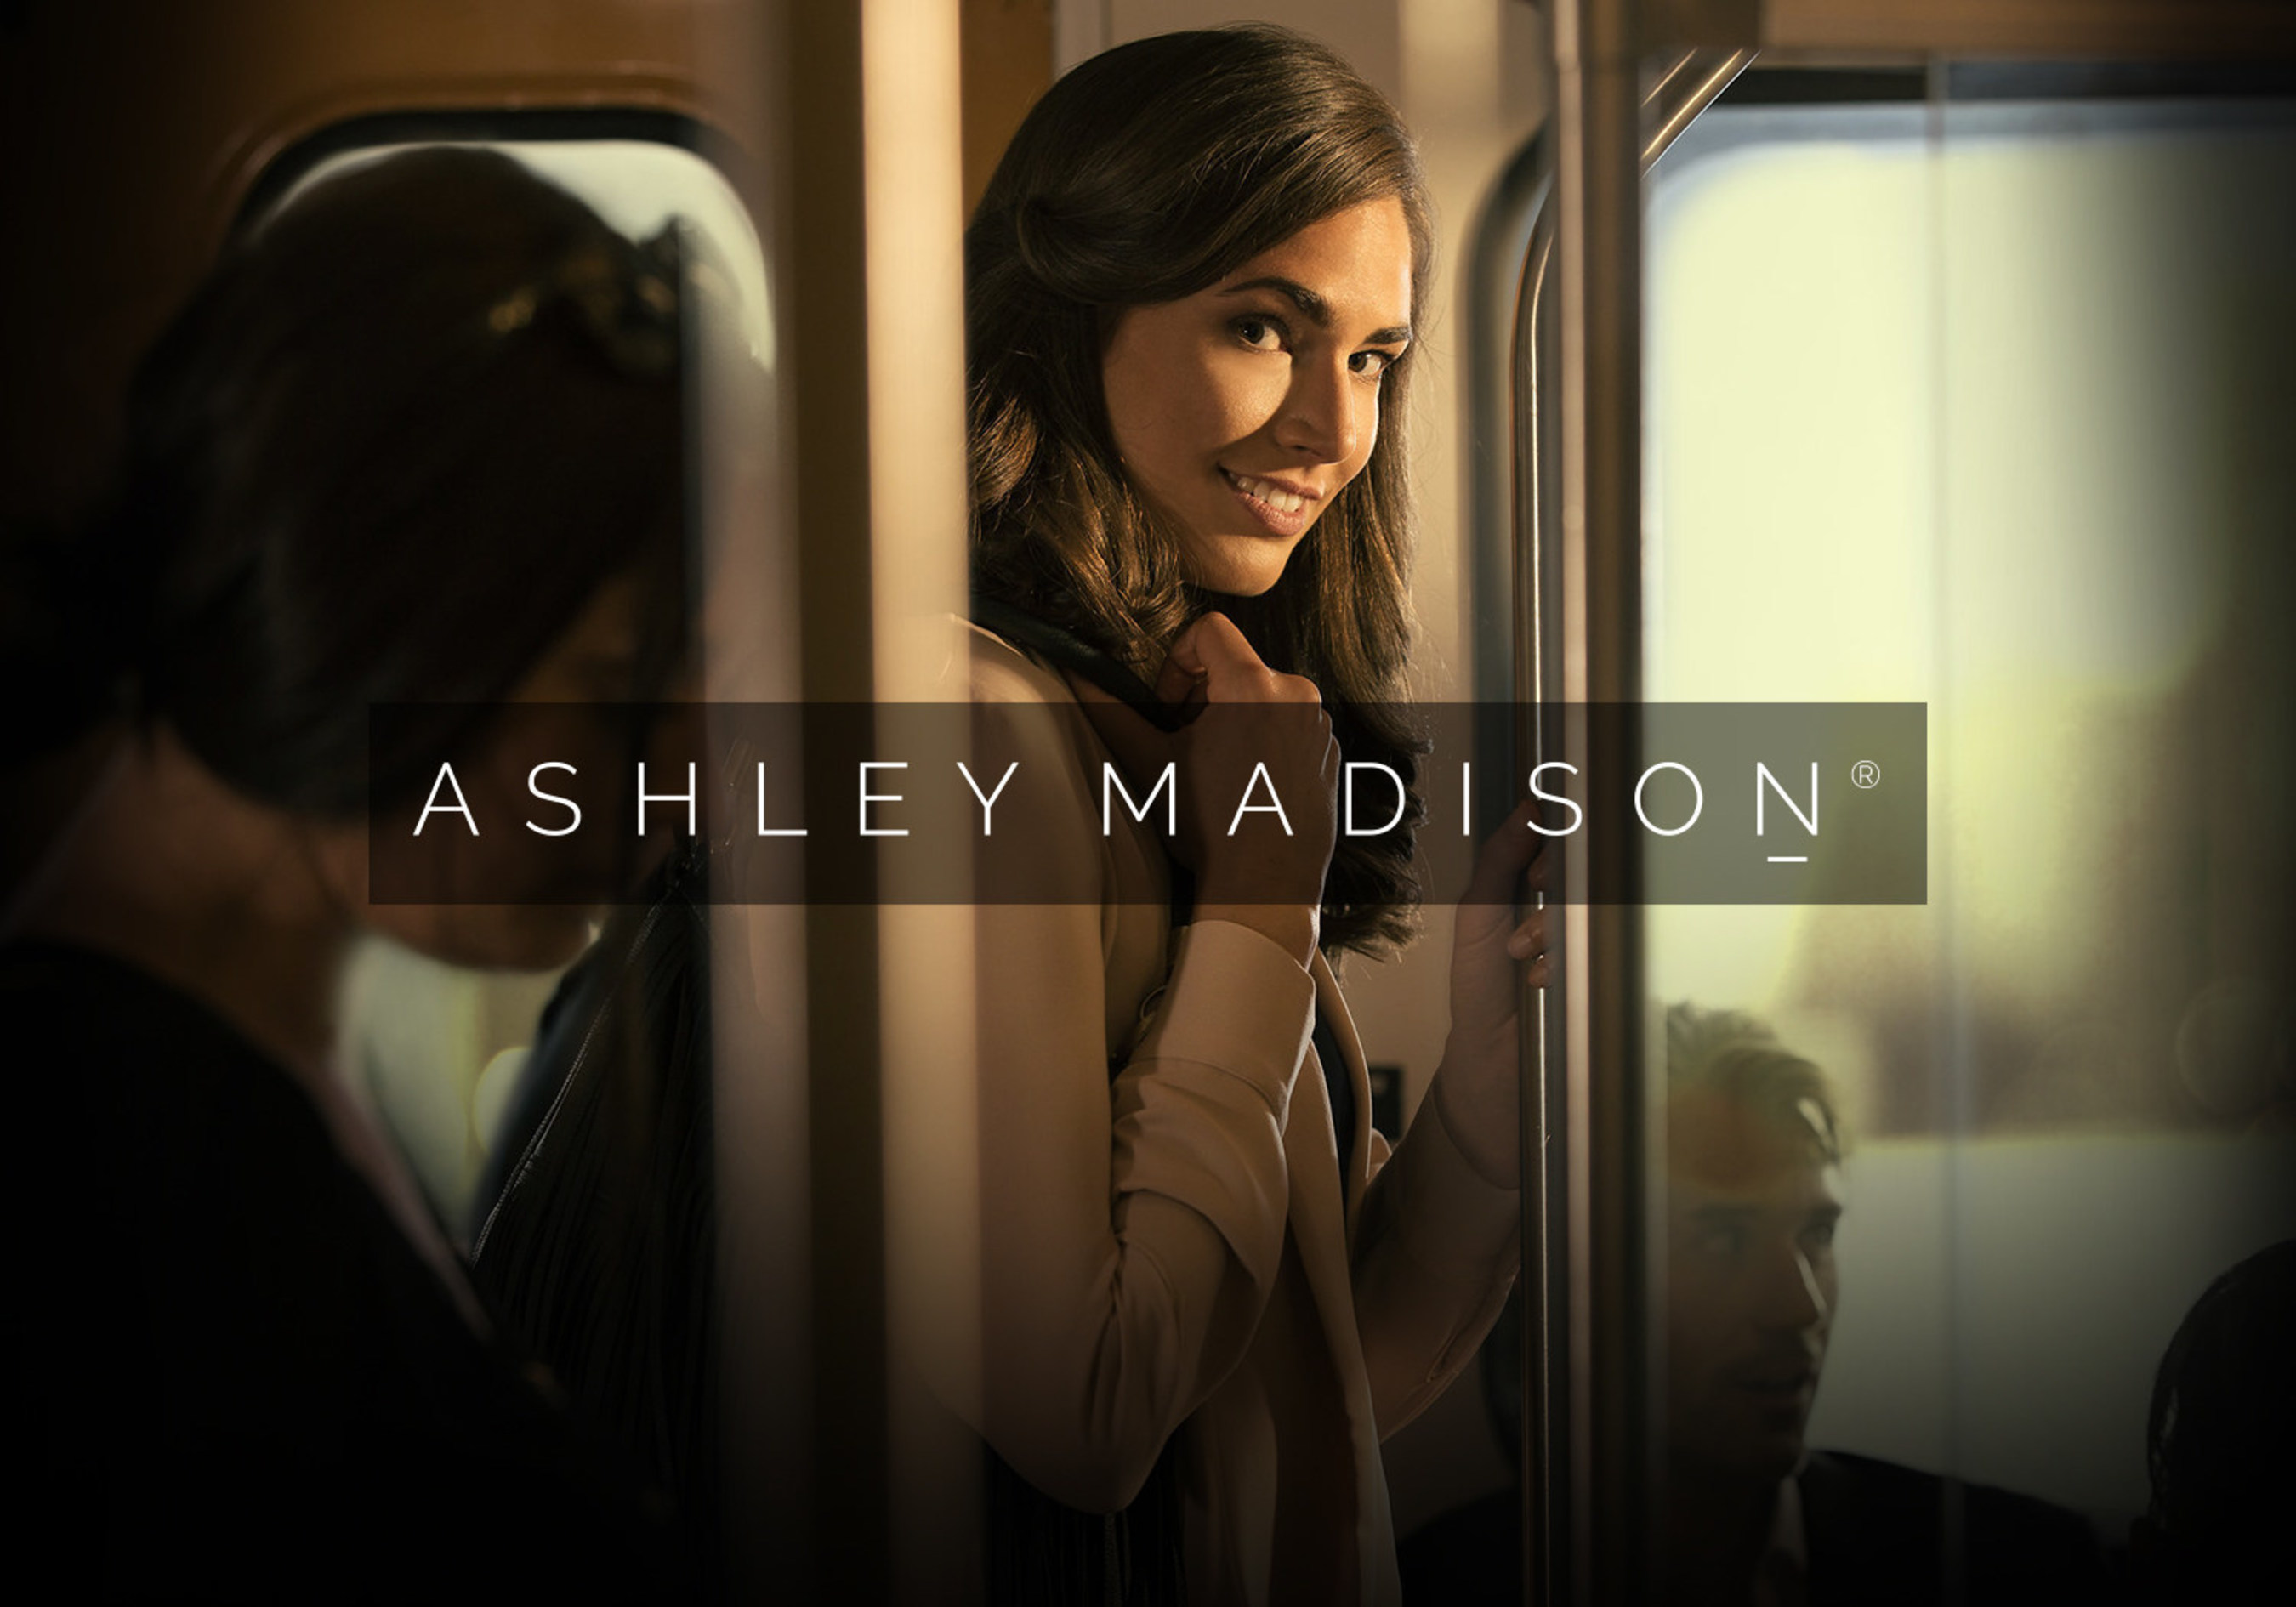 Online dating leader Ashley Madison has dropped its signature Ssssh branding in favour of a modern, fresh update.  Learn more at AshleyMadison.com